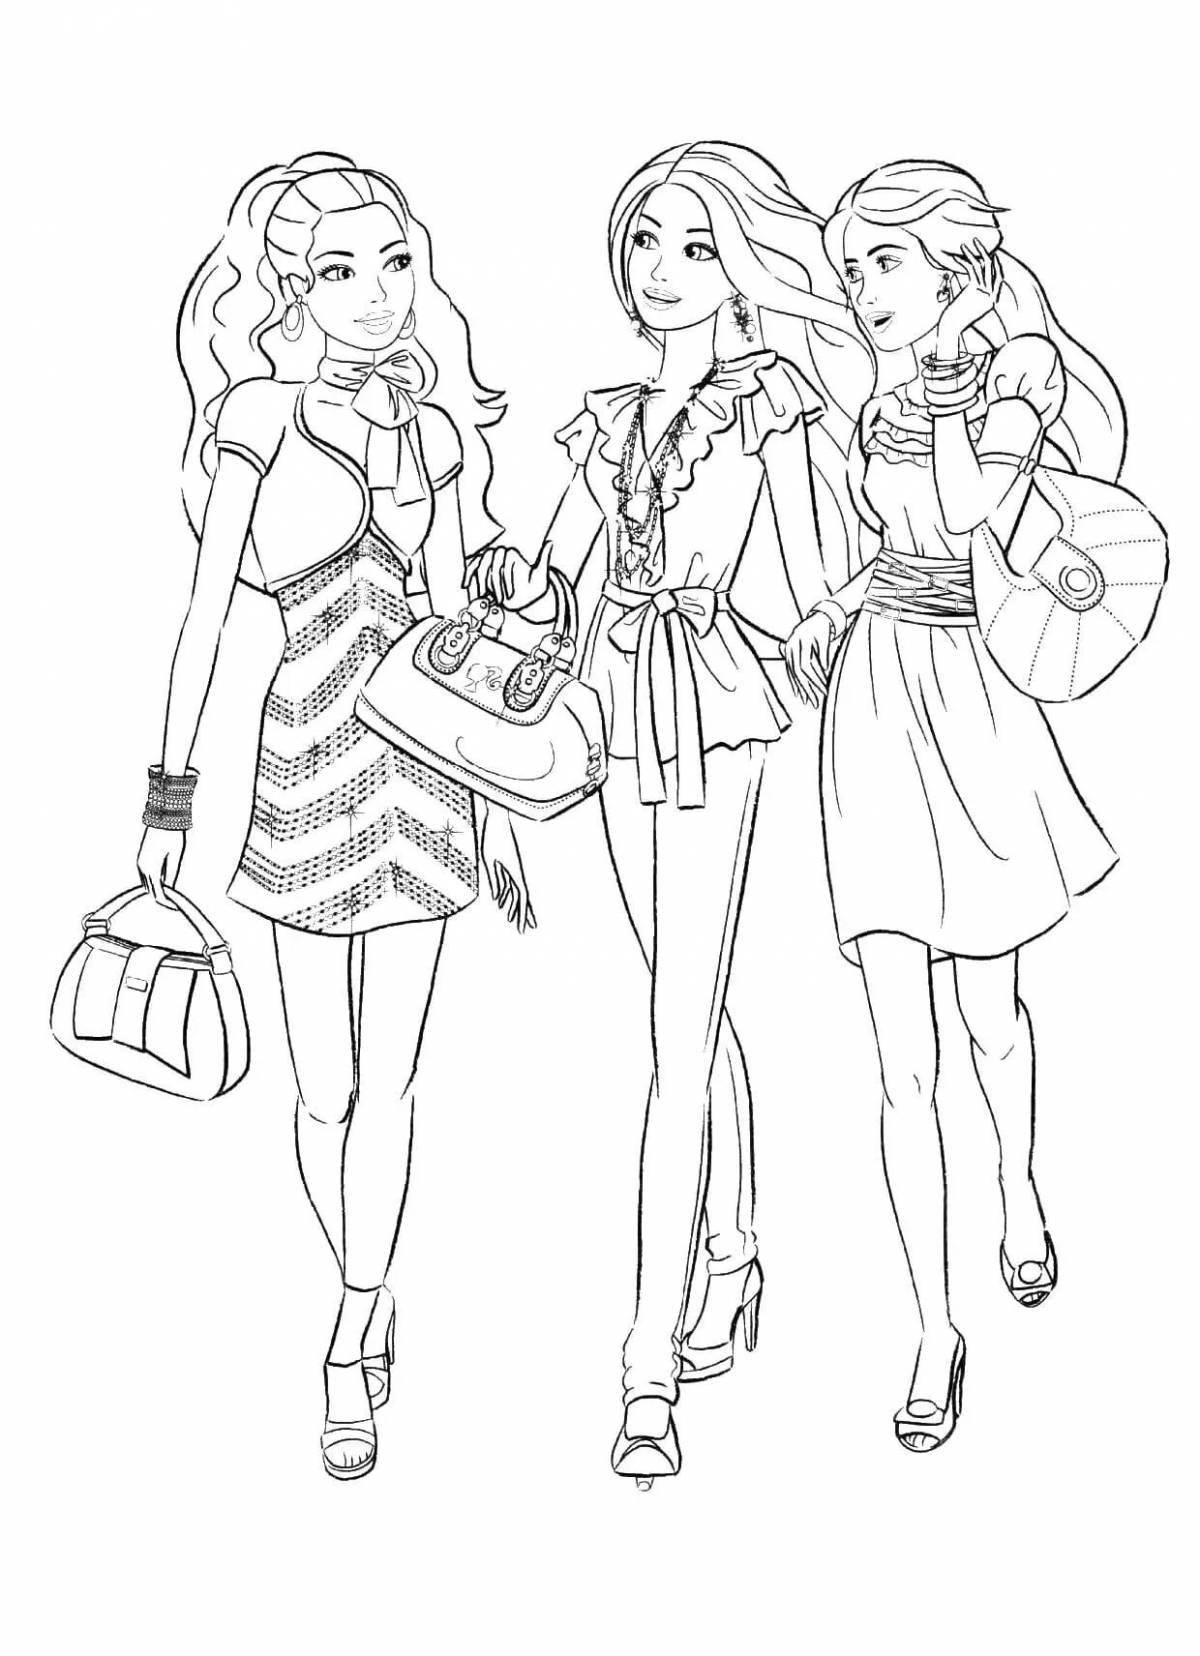 Coloring page holiday shopping